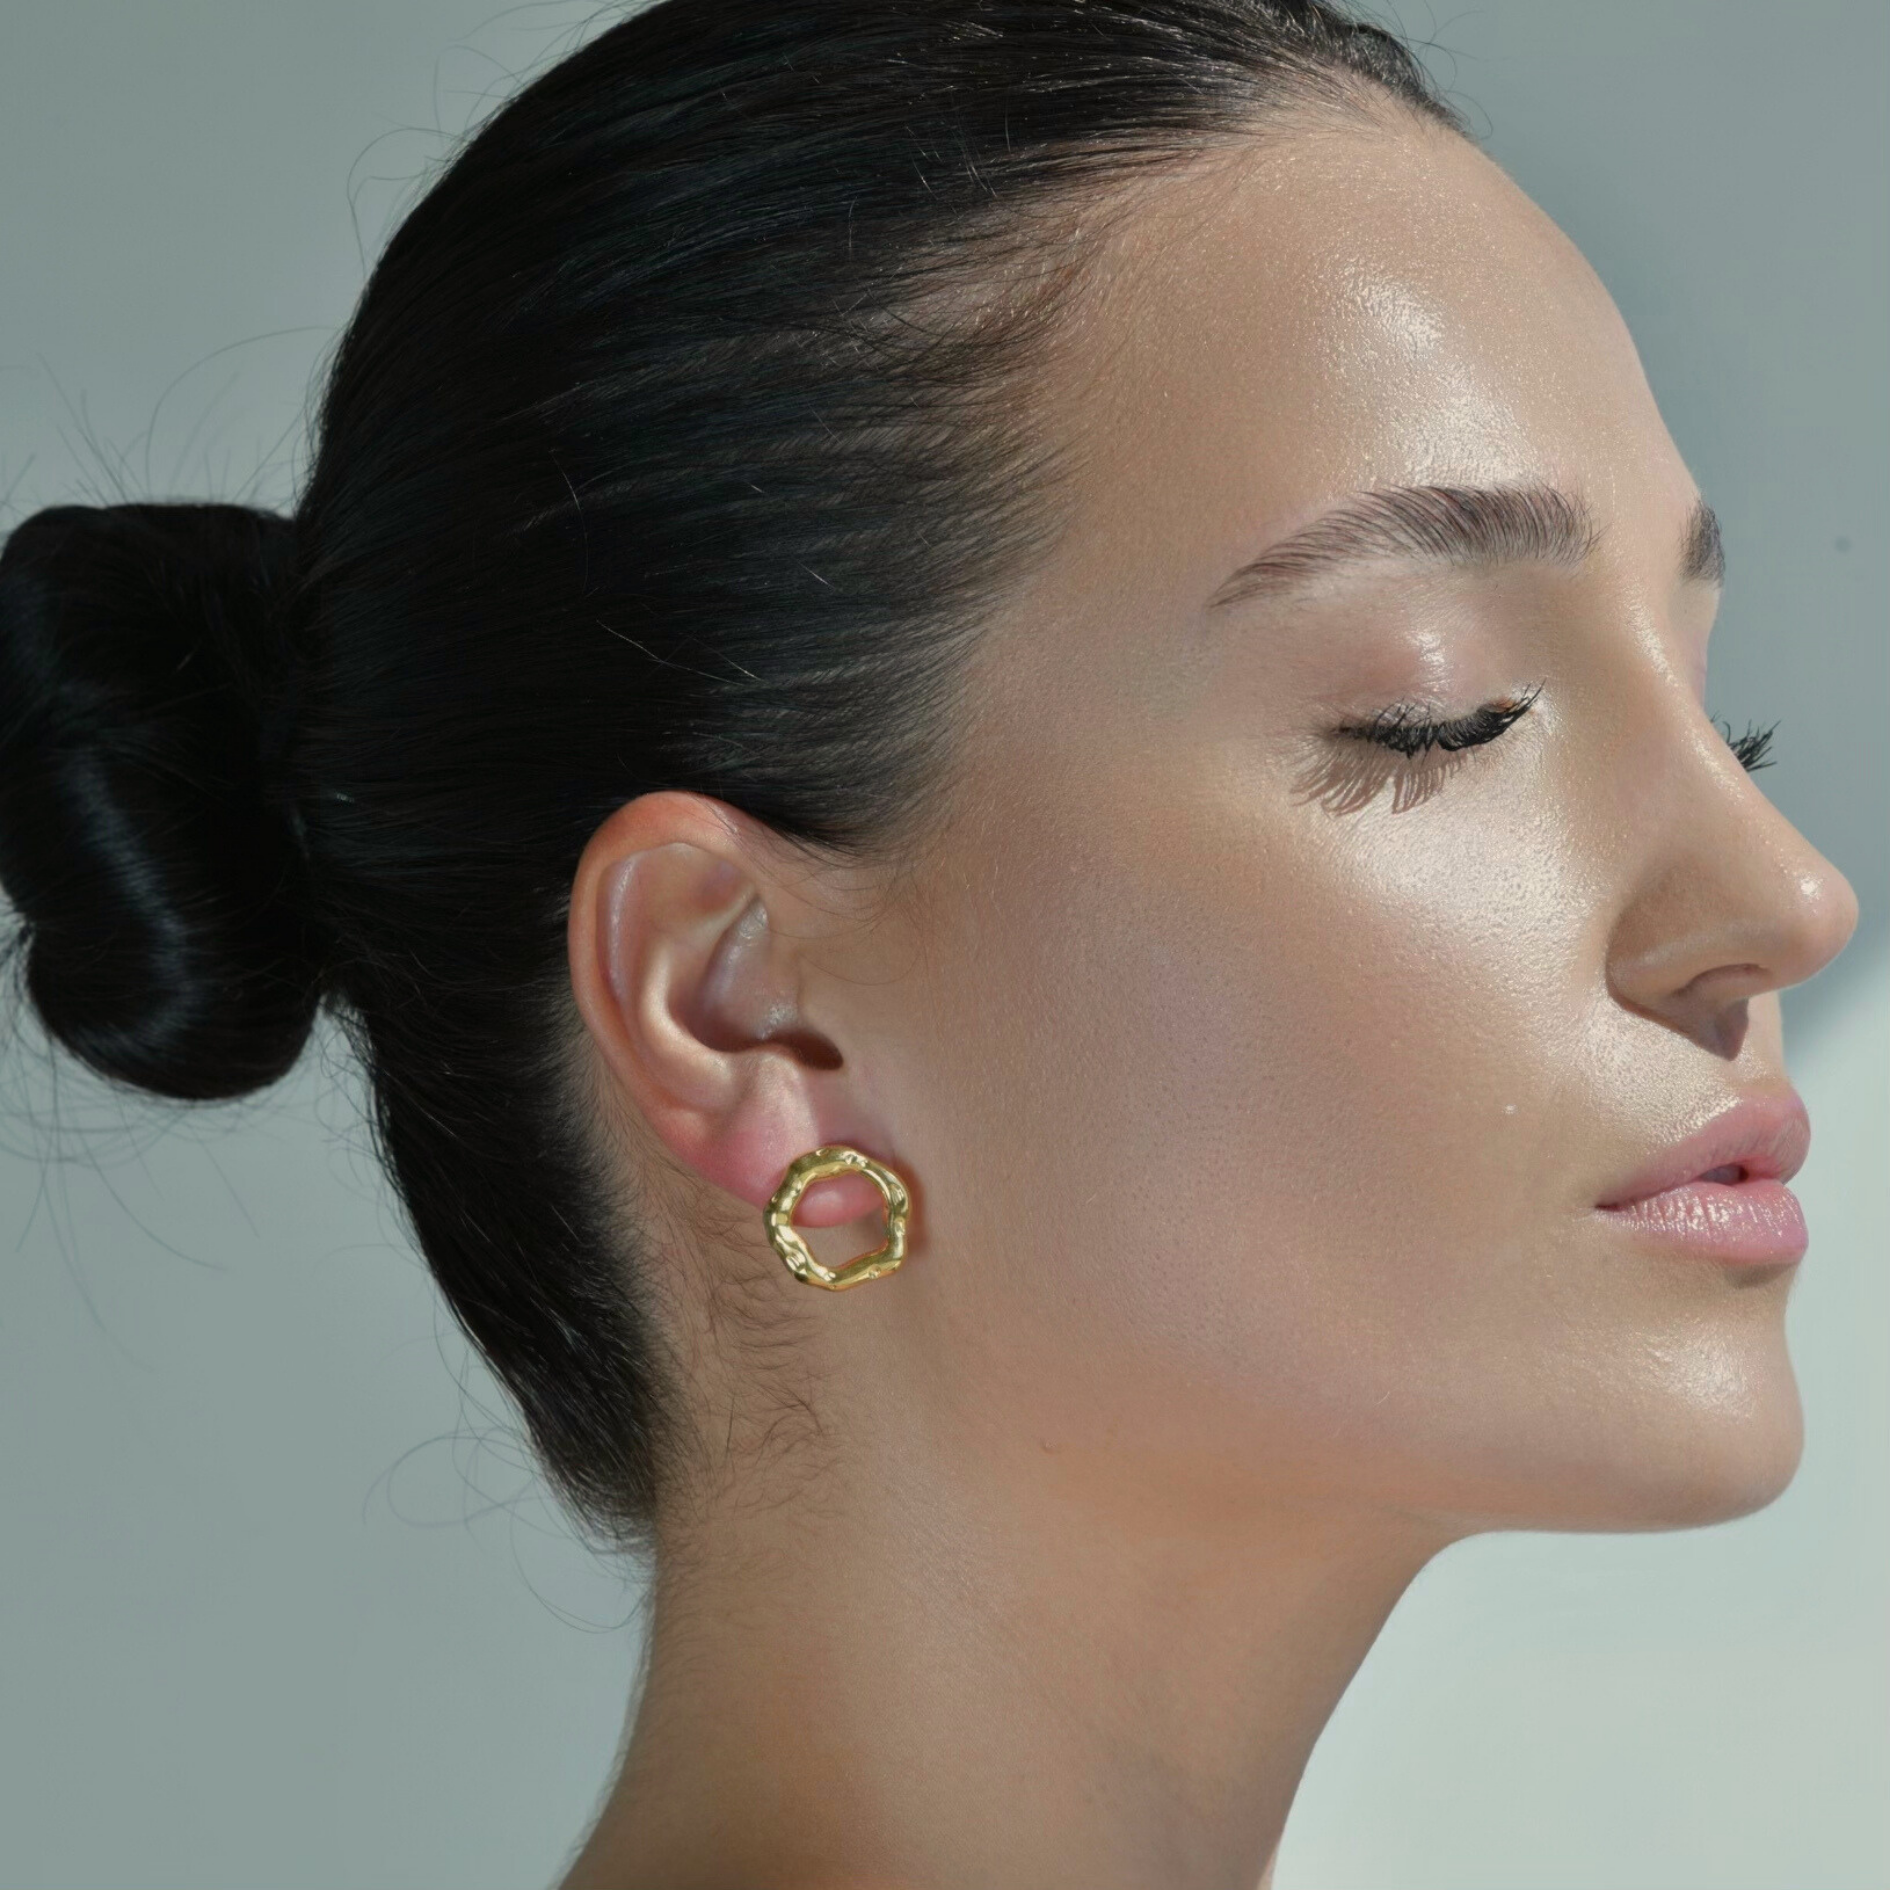 Woman Wearing Circle Earrings with irregular shape. Gold plated with texture that imitates movement.